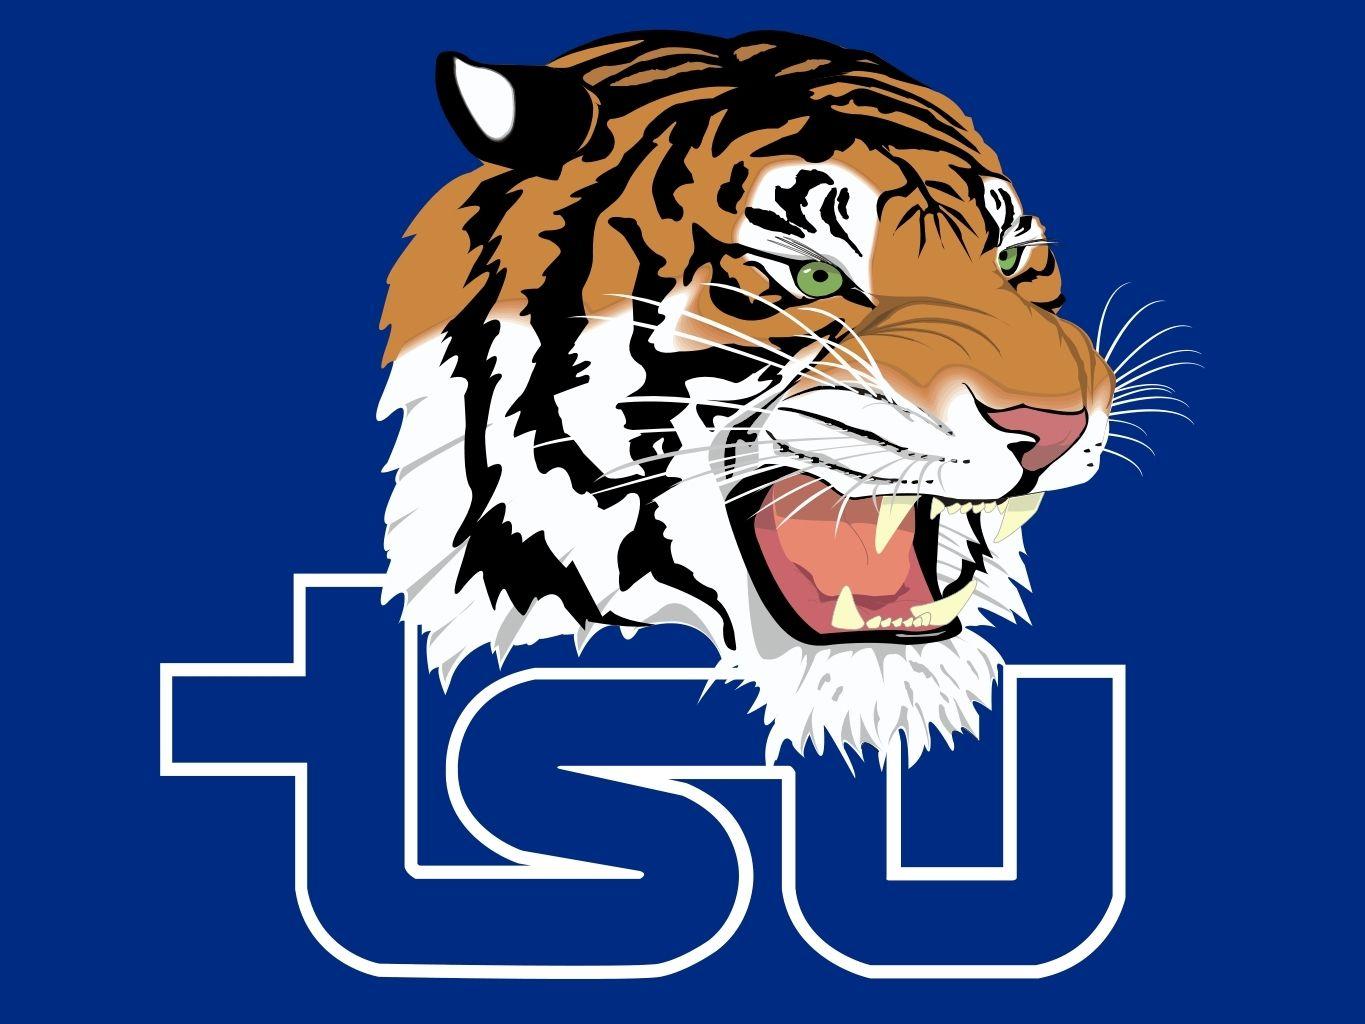 Tennessee State University Logo - Tennessee State University Football Schedule.1 The Ville